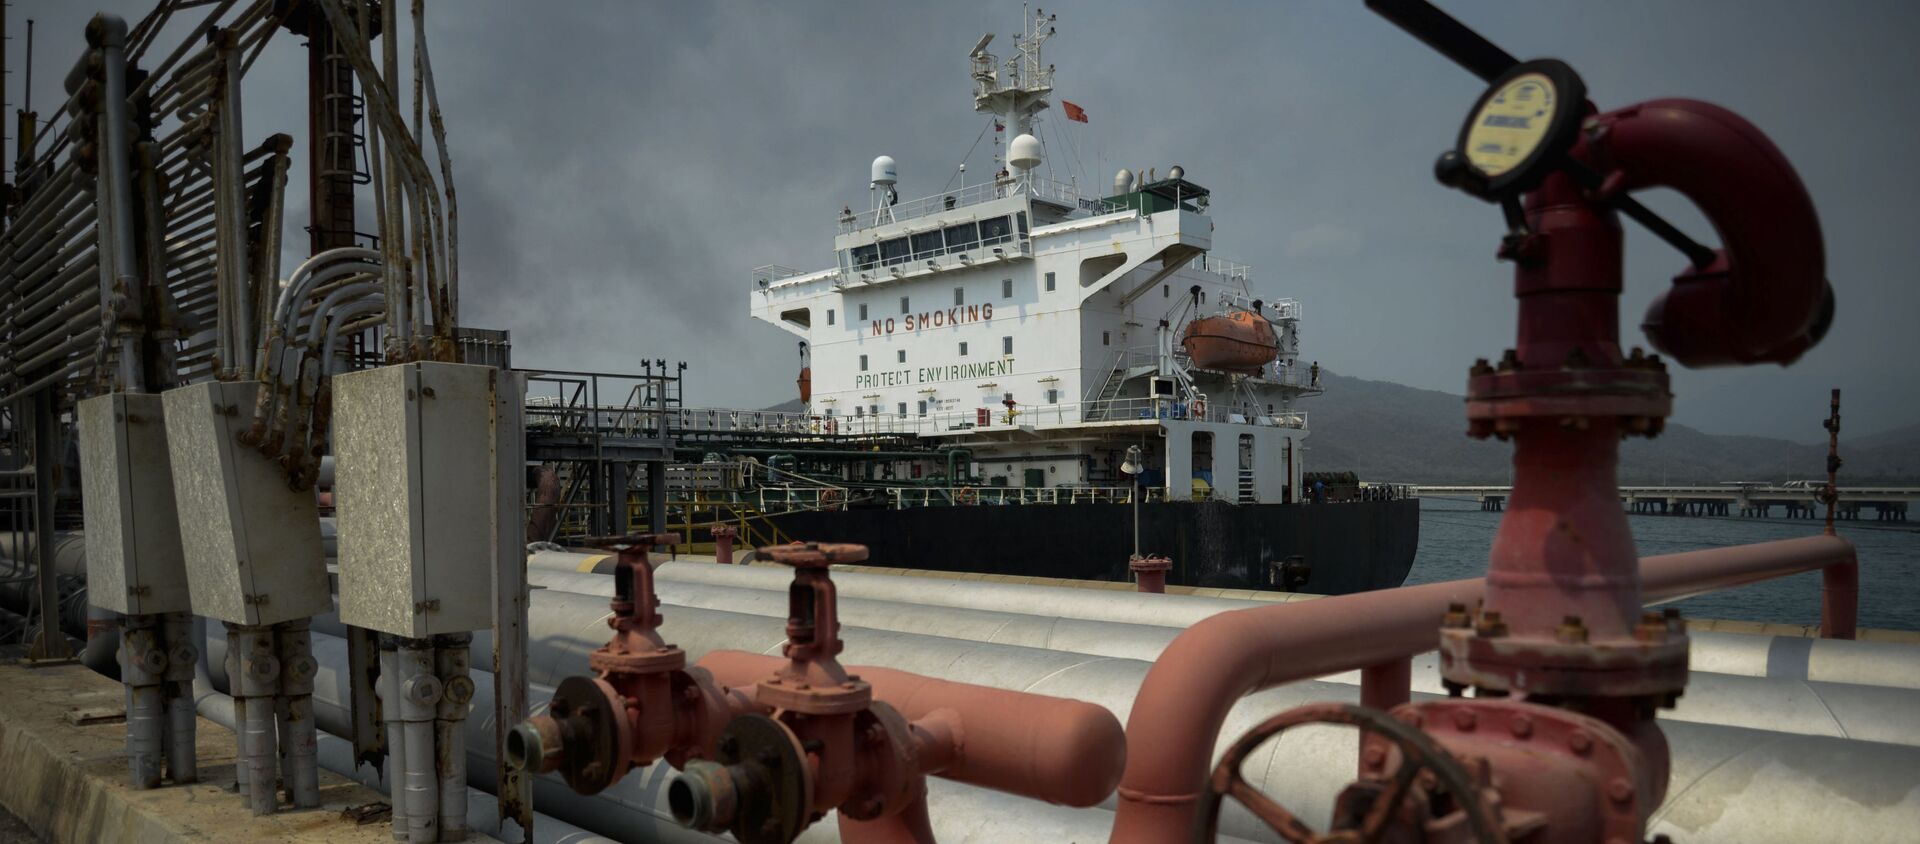 The Iranian-flagged oil tanker Fortune is docked at the El Palito refinery after its arrival to Puerto Cabello in the northern state of Carabobo, Venezuela, on May 25, 2020 - Sputnik International, 1920, 04.10.2020